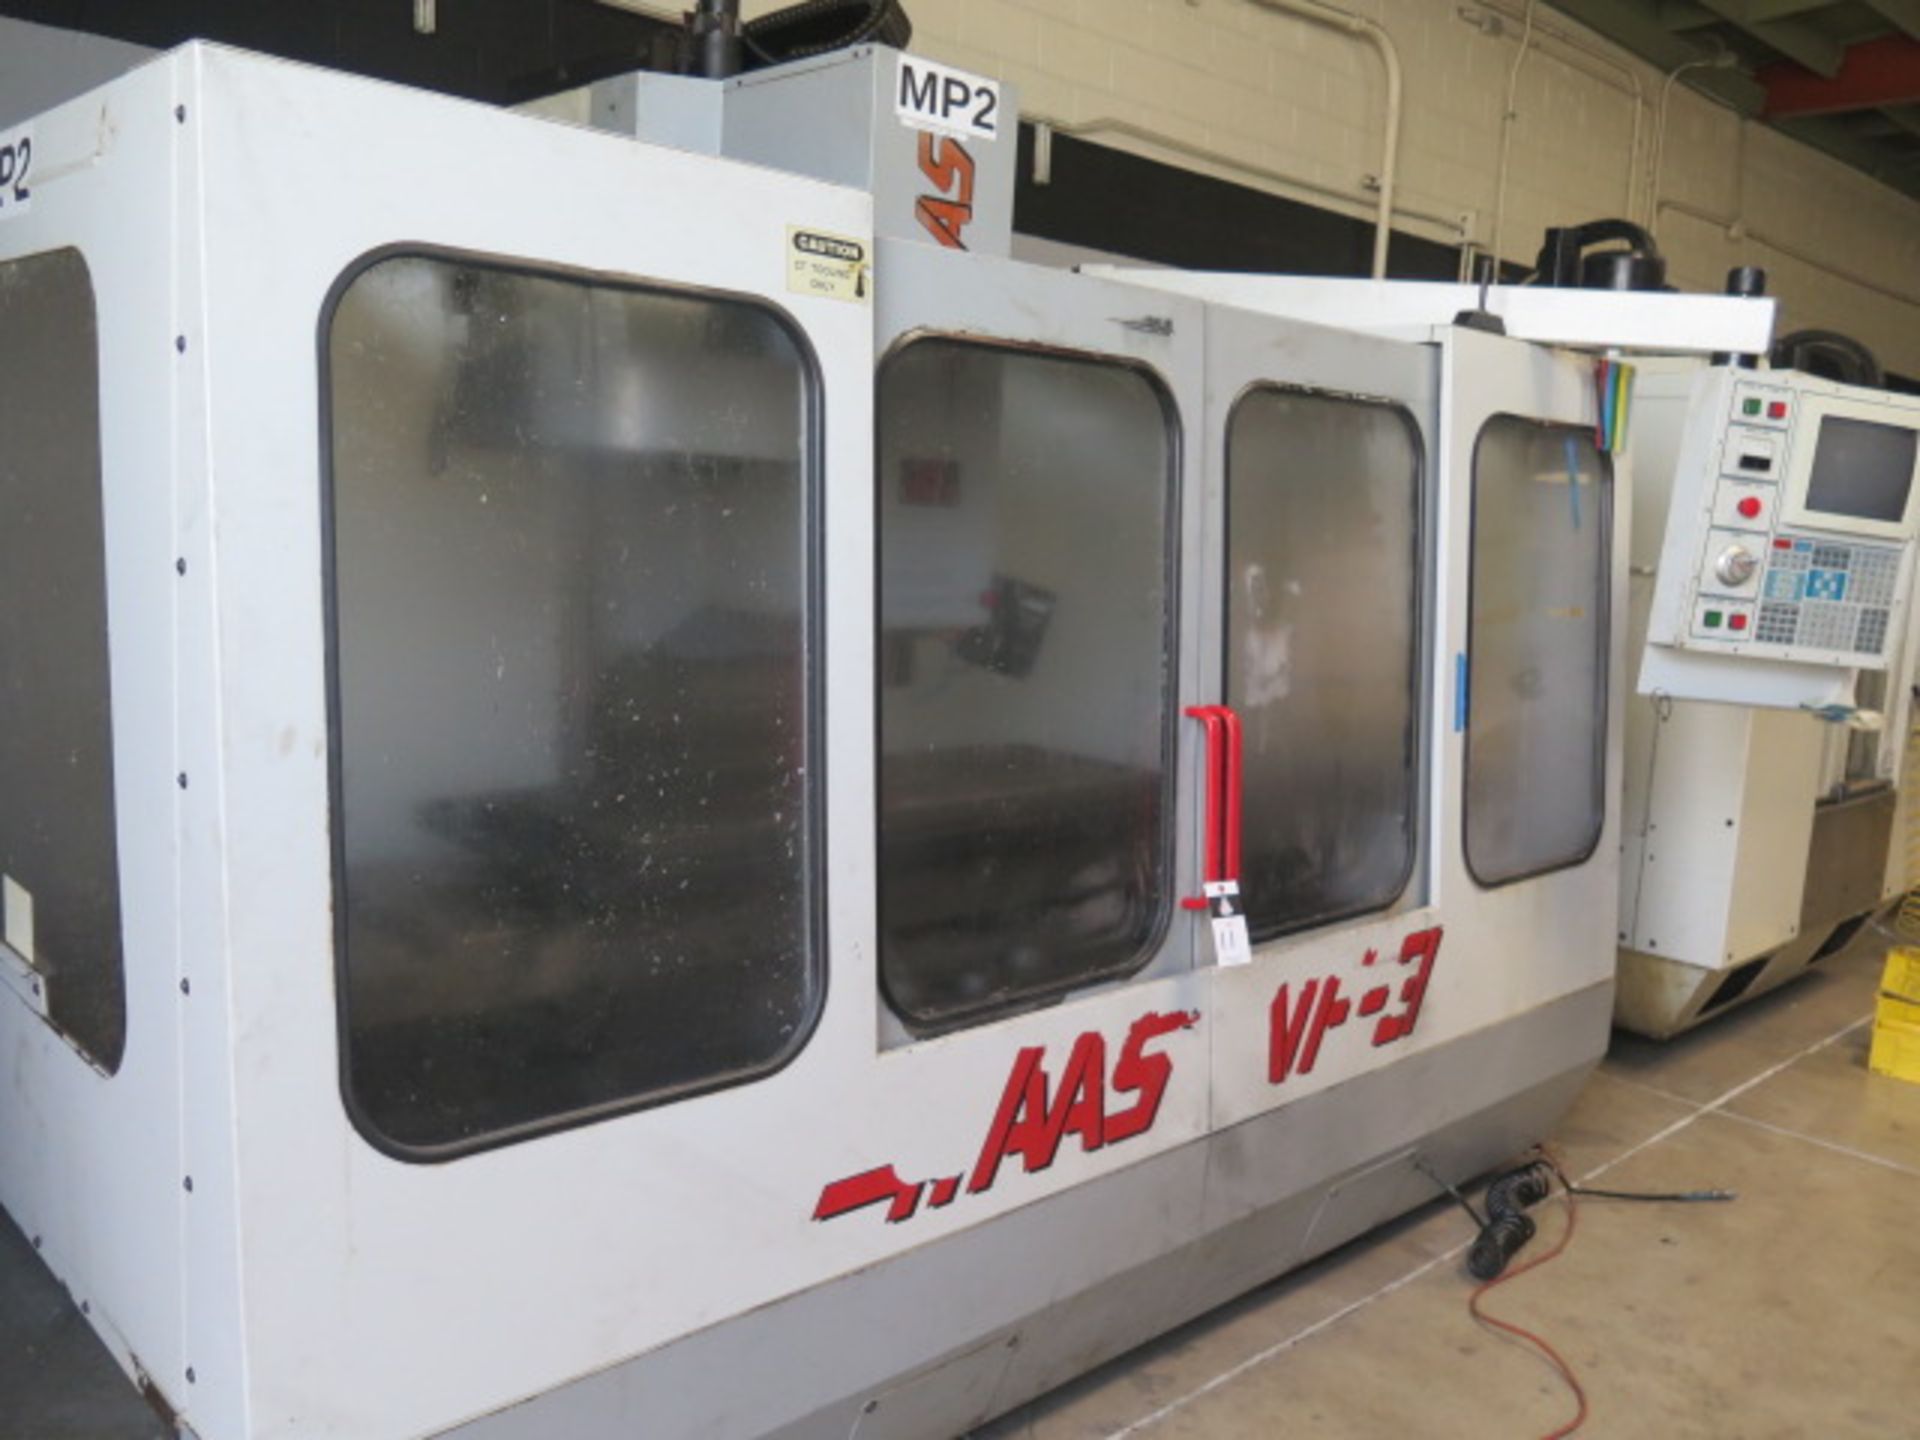 1995 Haas VF-3 4-Axid CNC VMC s/n 5039 w/ Haas Controls, 20-Station ATC, SOLD AS IS